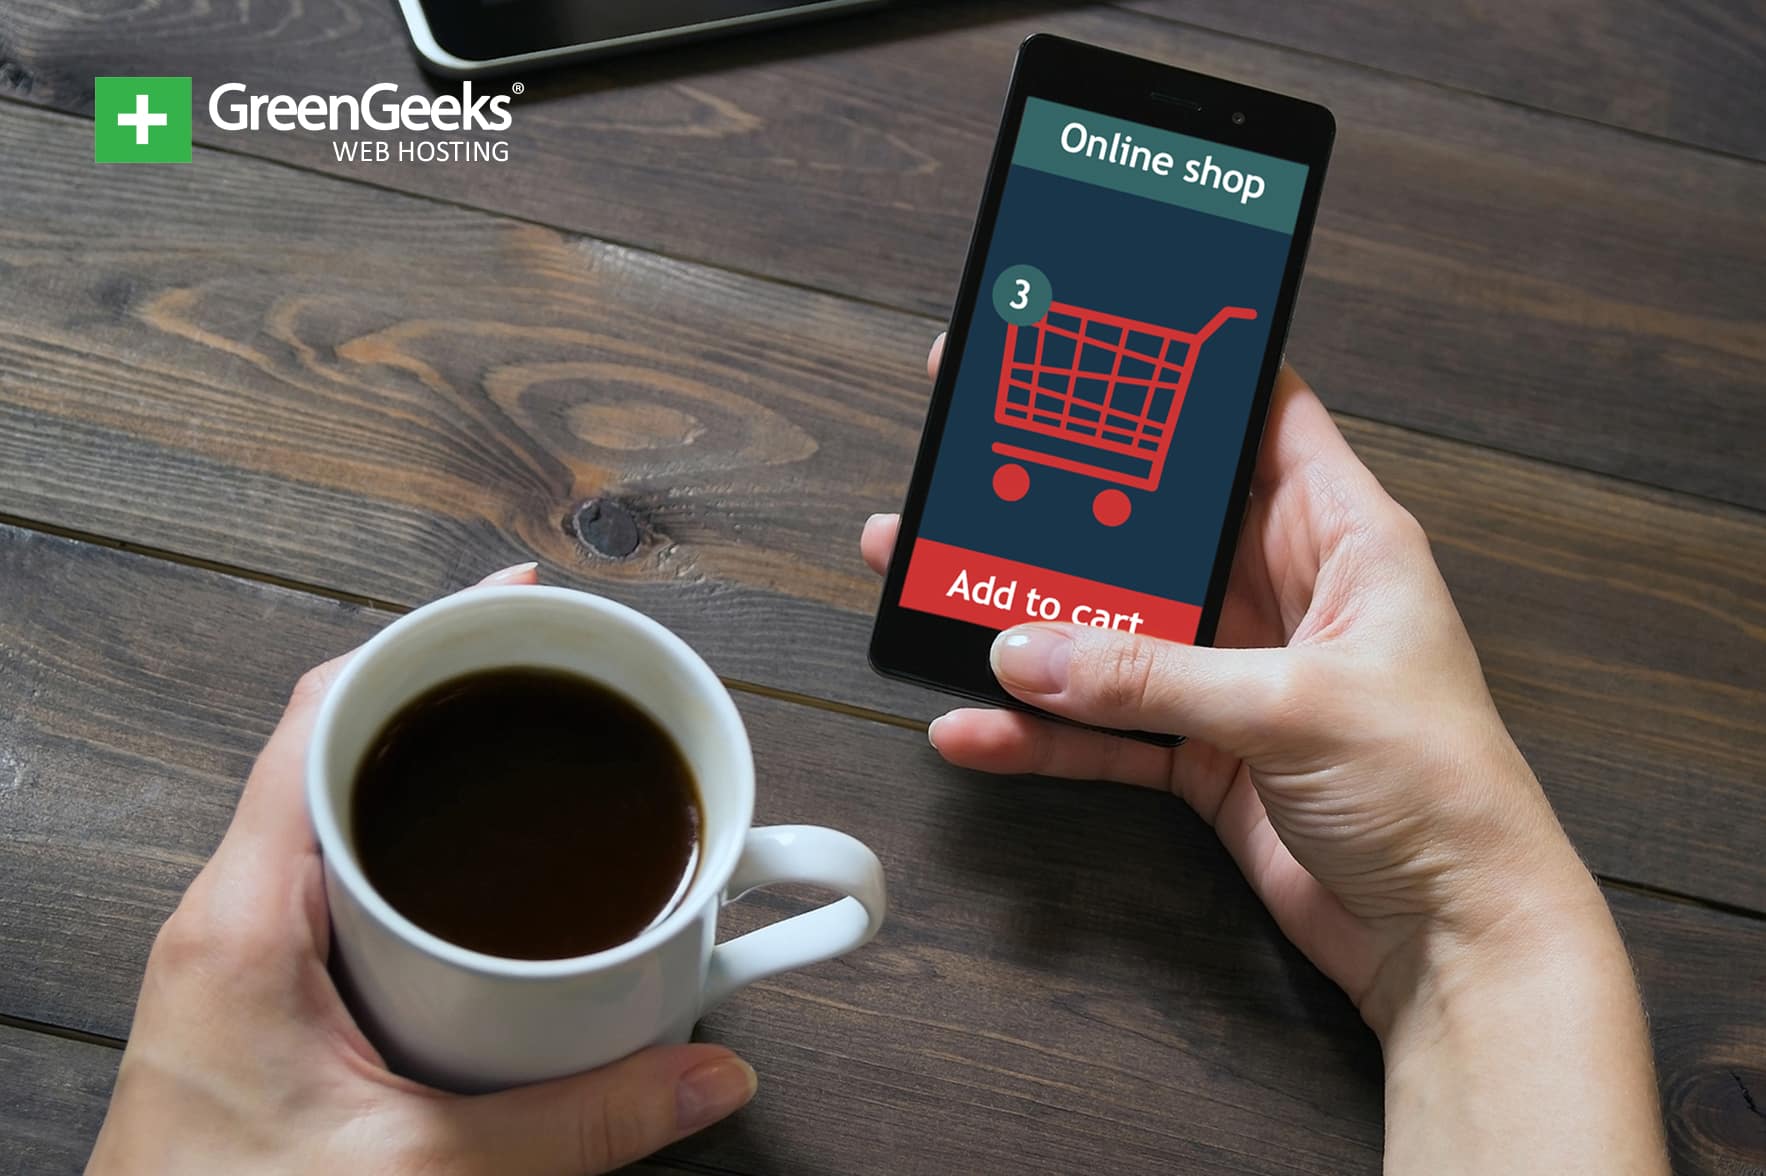 Mobile Ecommerce Trends